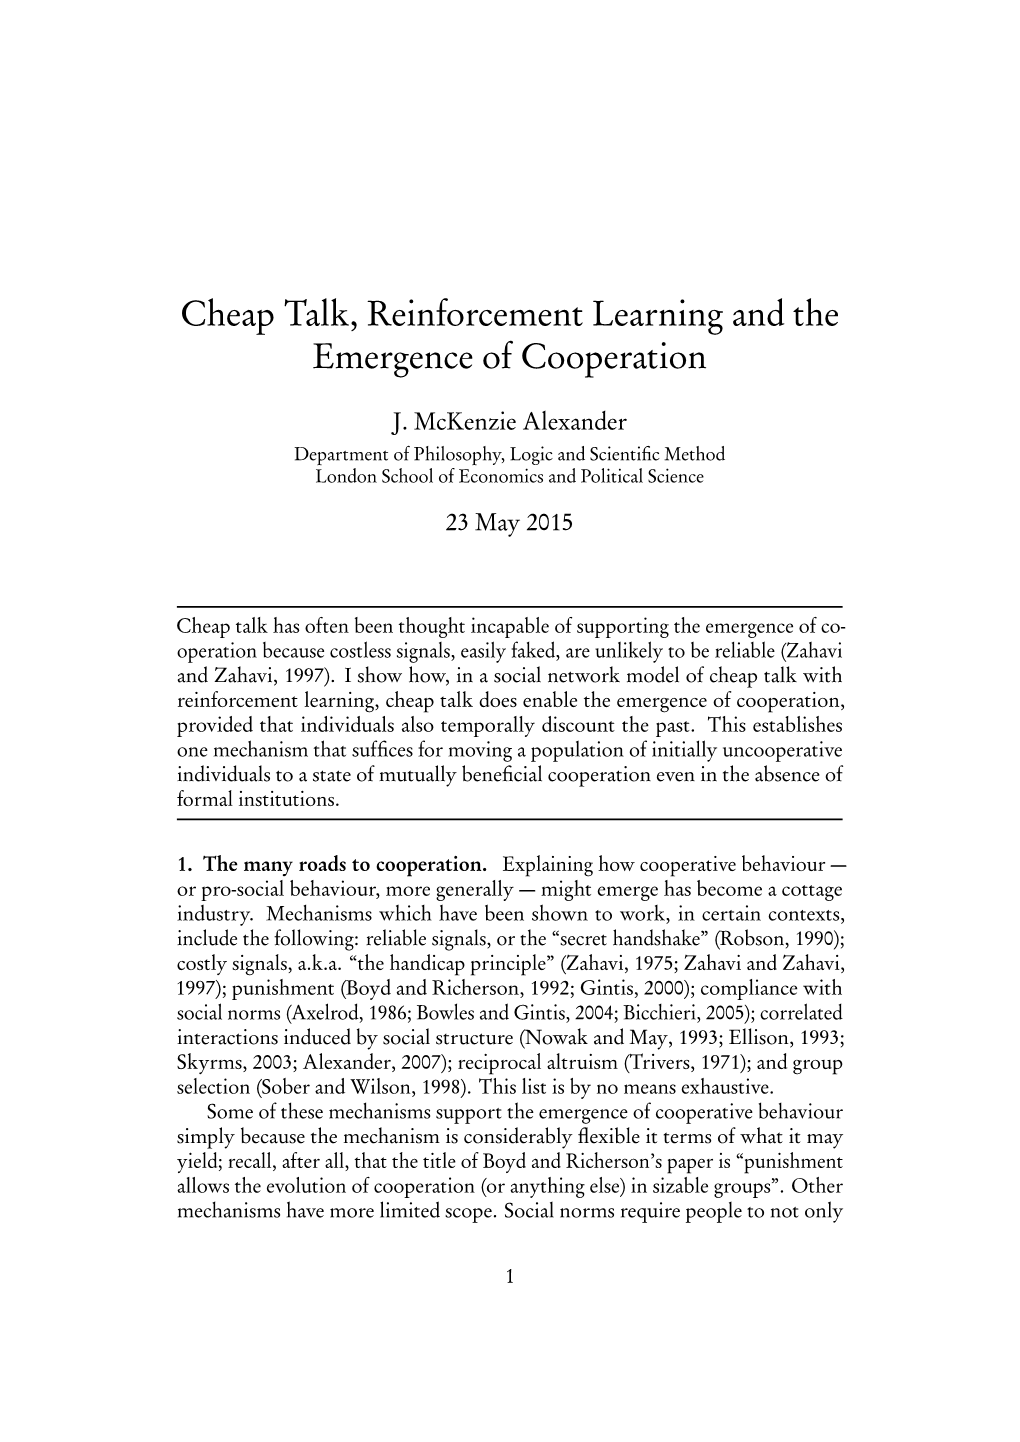 Cheap Talk, Reinforcement Learning and the Emergence of Cooperation